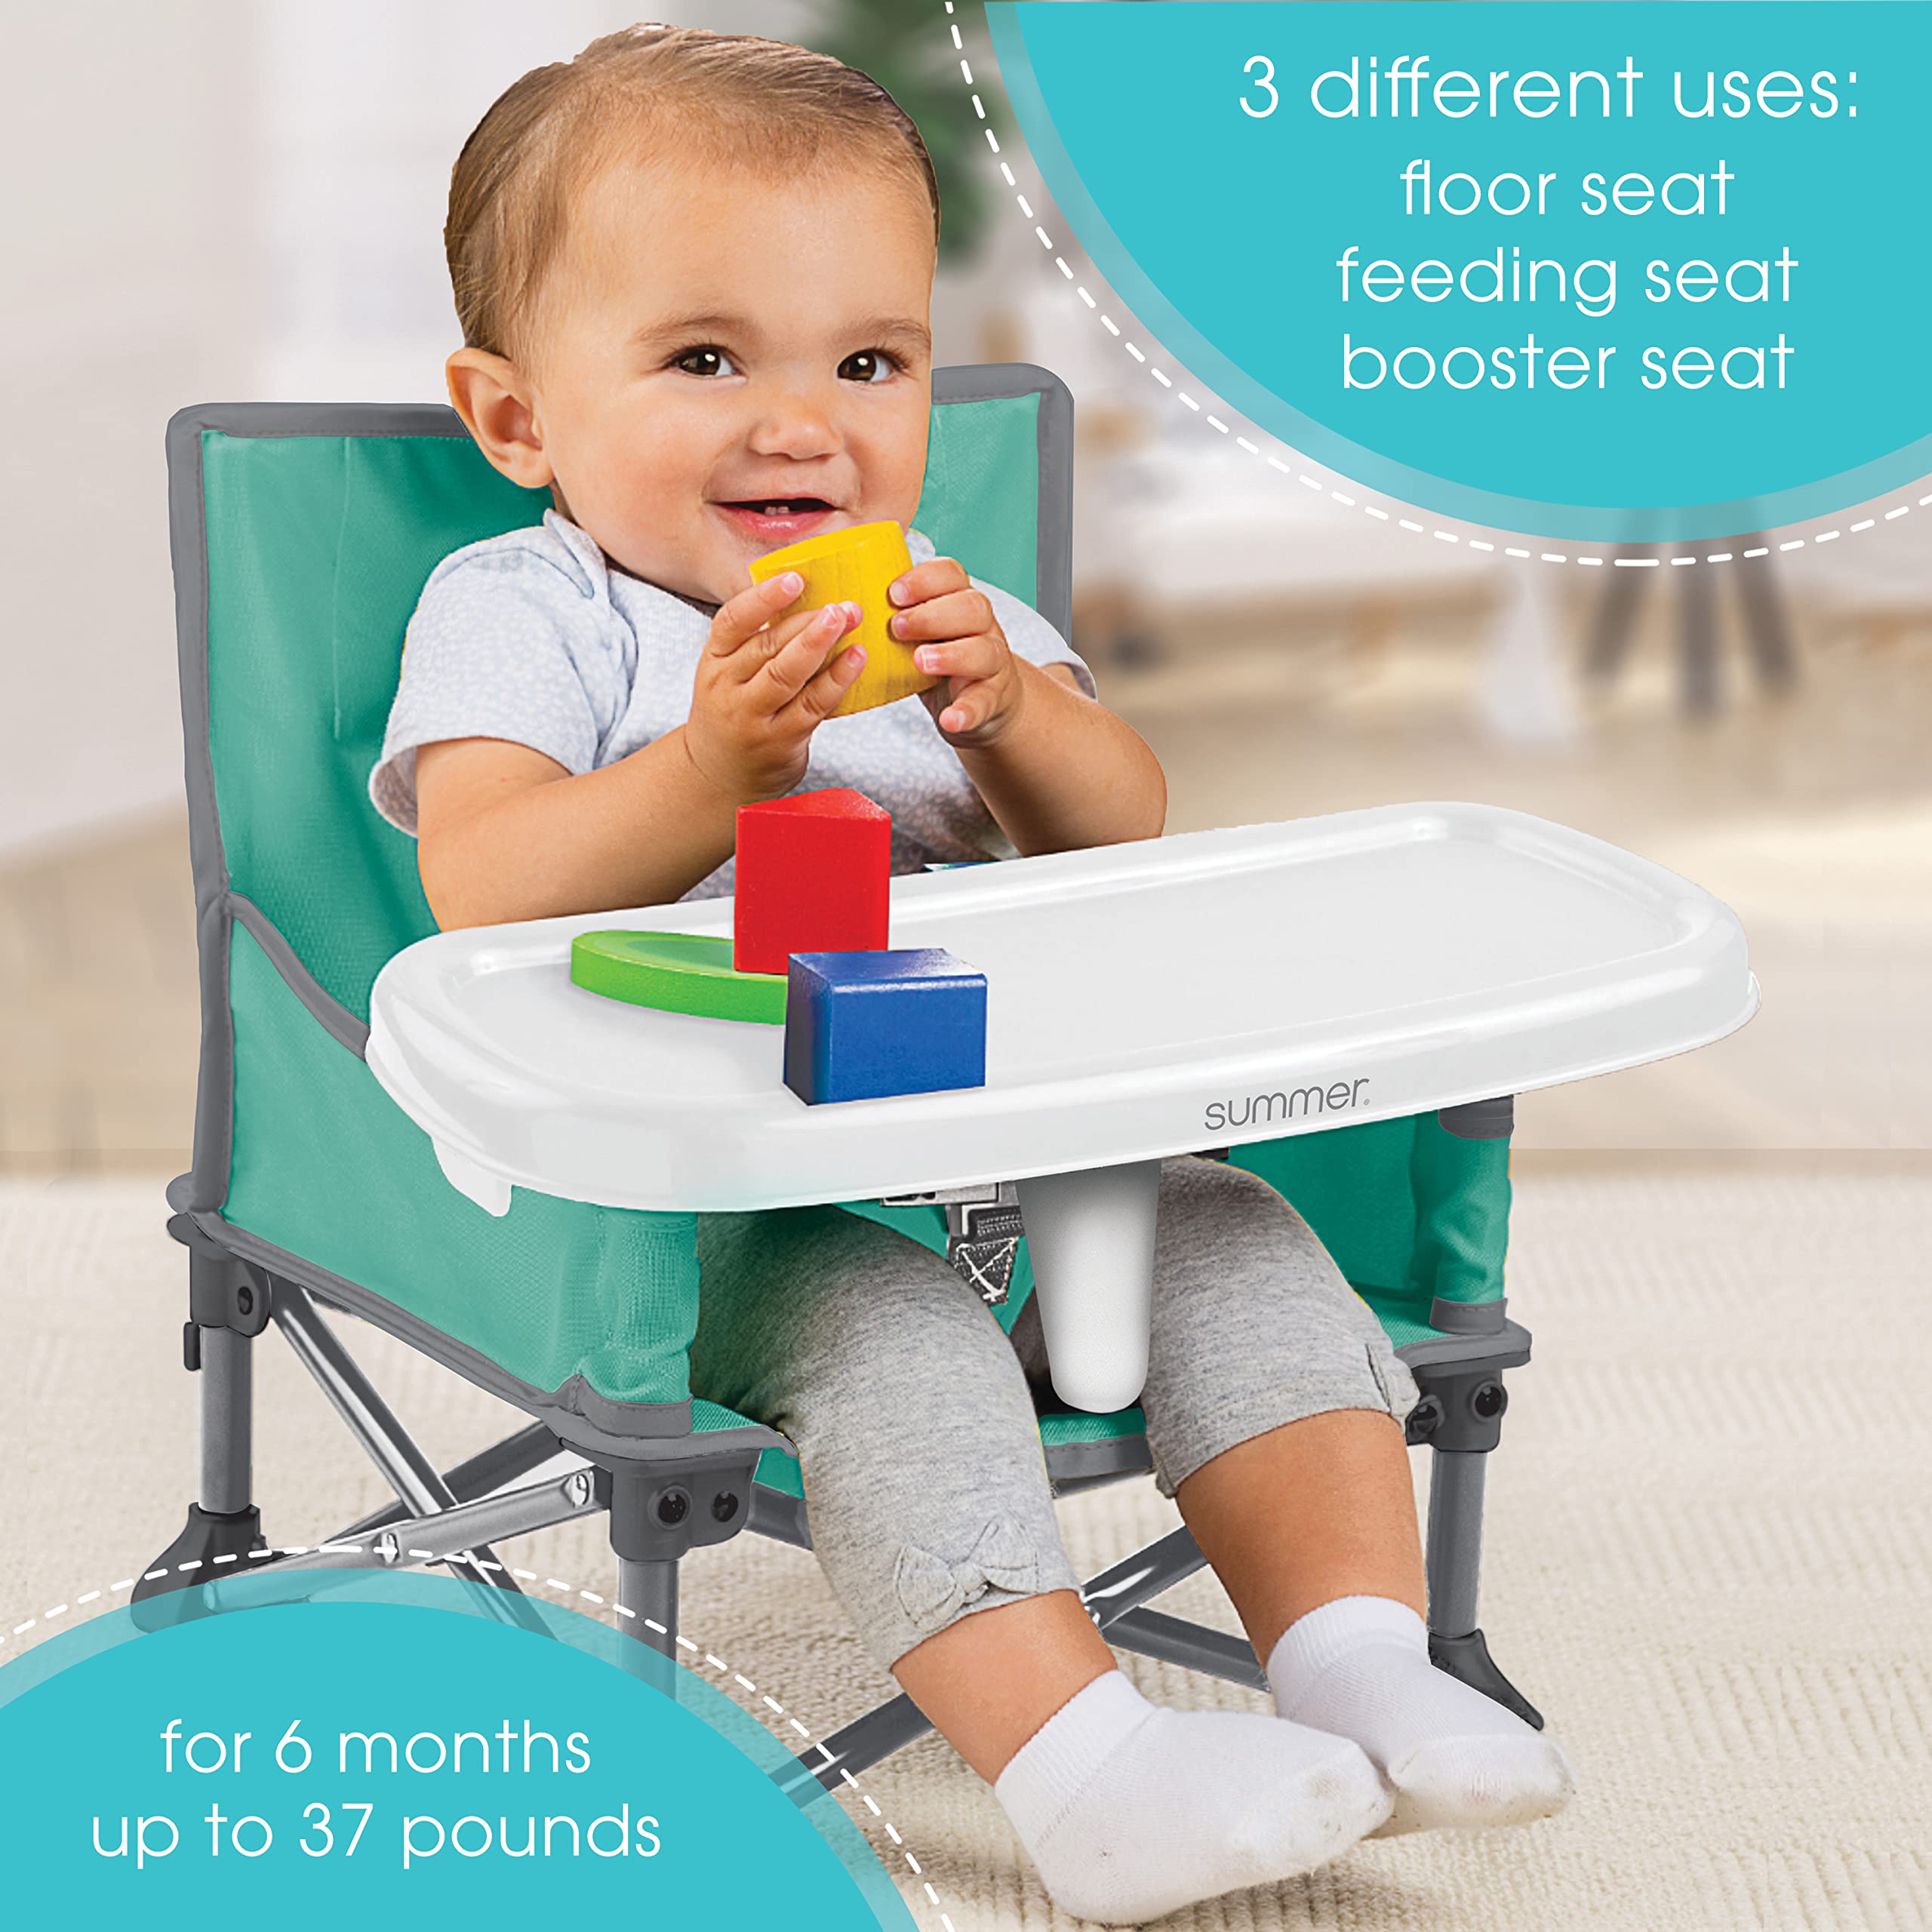 Summer Pop ‘N Sit Portable Booster Chair, Teal & Gray - Booster Seat for Indoor/Outdoor Use - Fast, Easy and Compact Fold